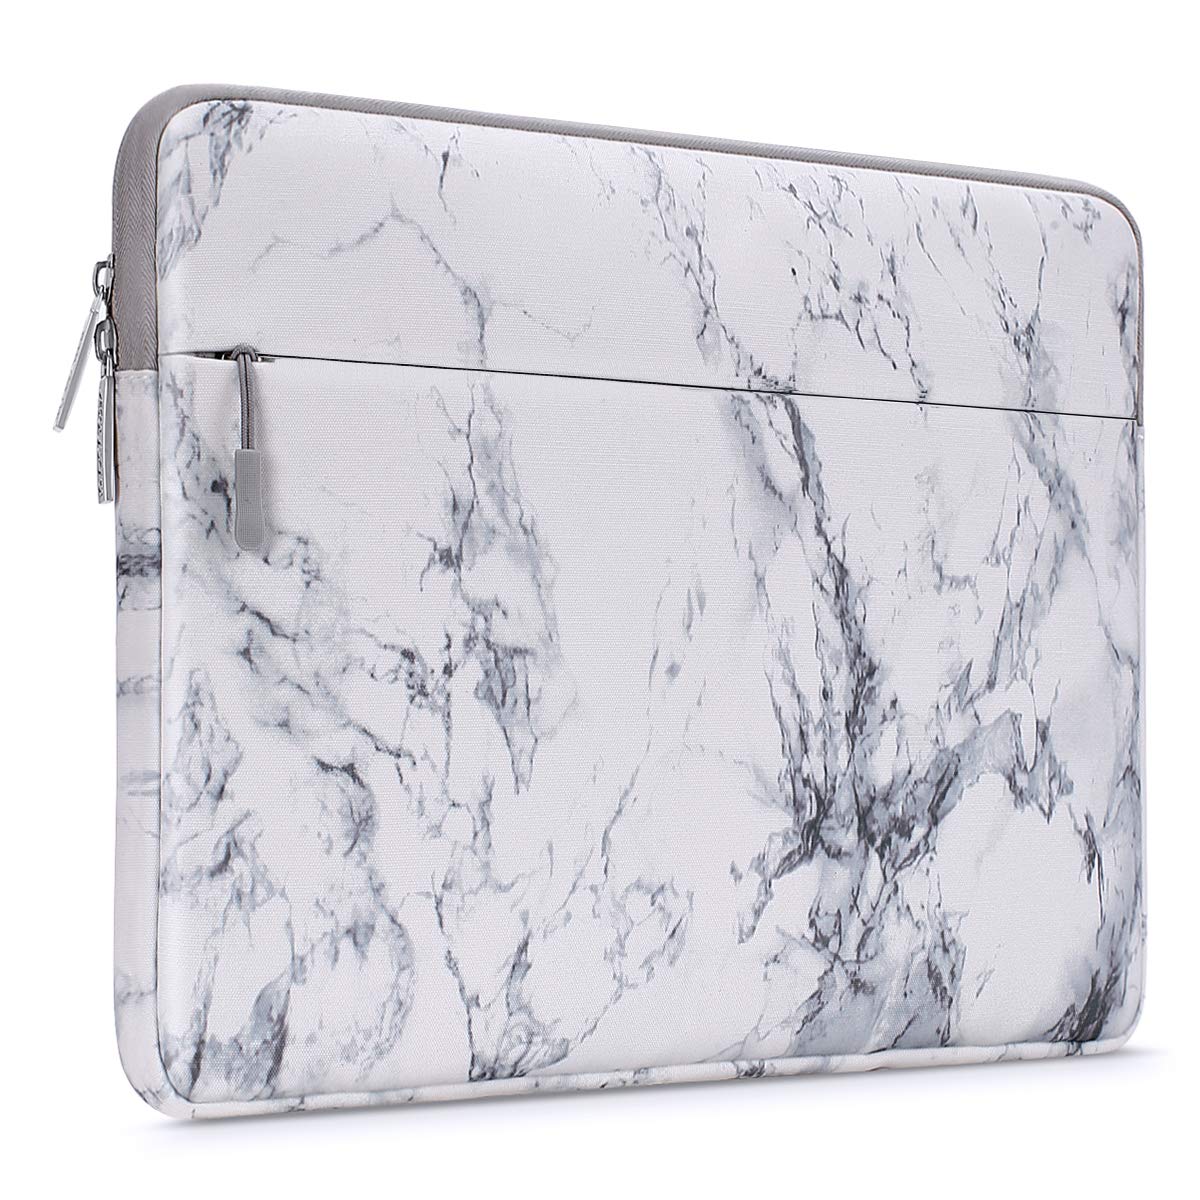 MOSISO Laptop Sleeve Bag Compatible 13-13.3 Inch MacBook Pro, MacBook Air, Notebook Computer with Accessory Pocket, Ultraportable Protective Canvas Marble Pattern Carrying Case Cover, White